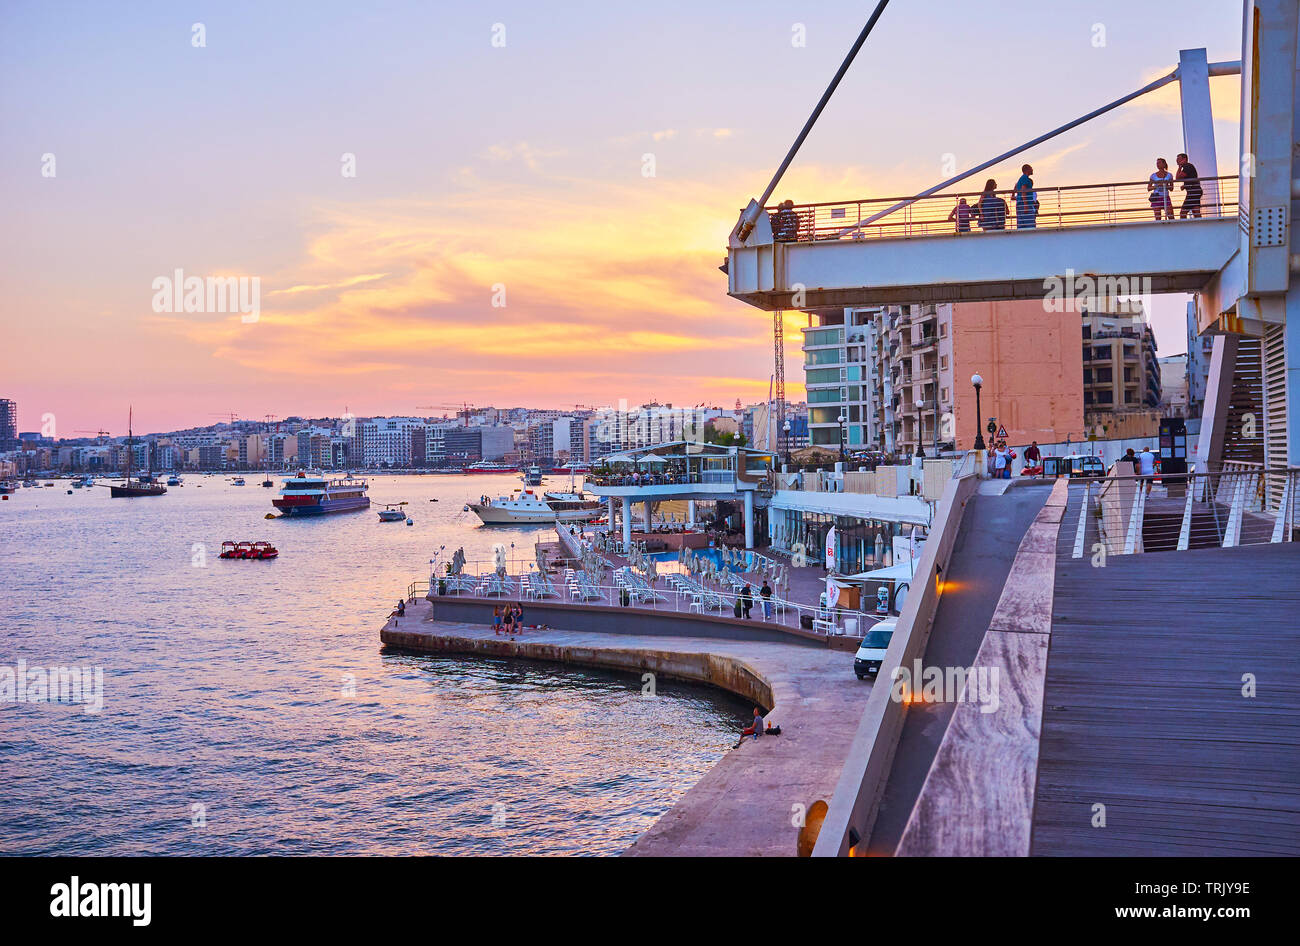 SLIEMA, MALTA - JUNE 19, 2018: The picturesque evening in resort with a view on harbor with ships, fiery sky and comfortable coastal promenade of Tign Stock Photo